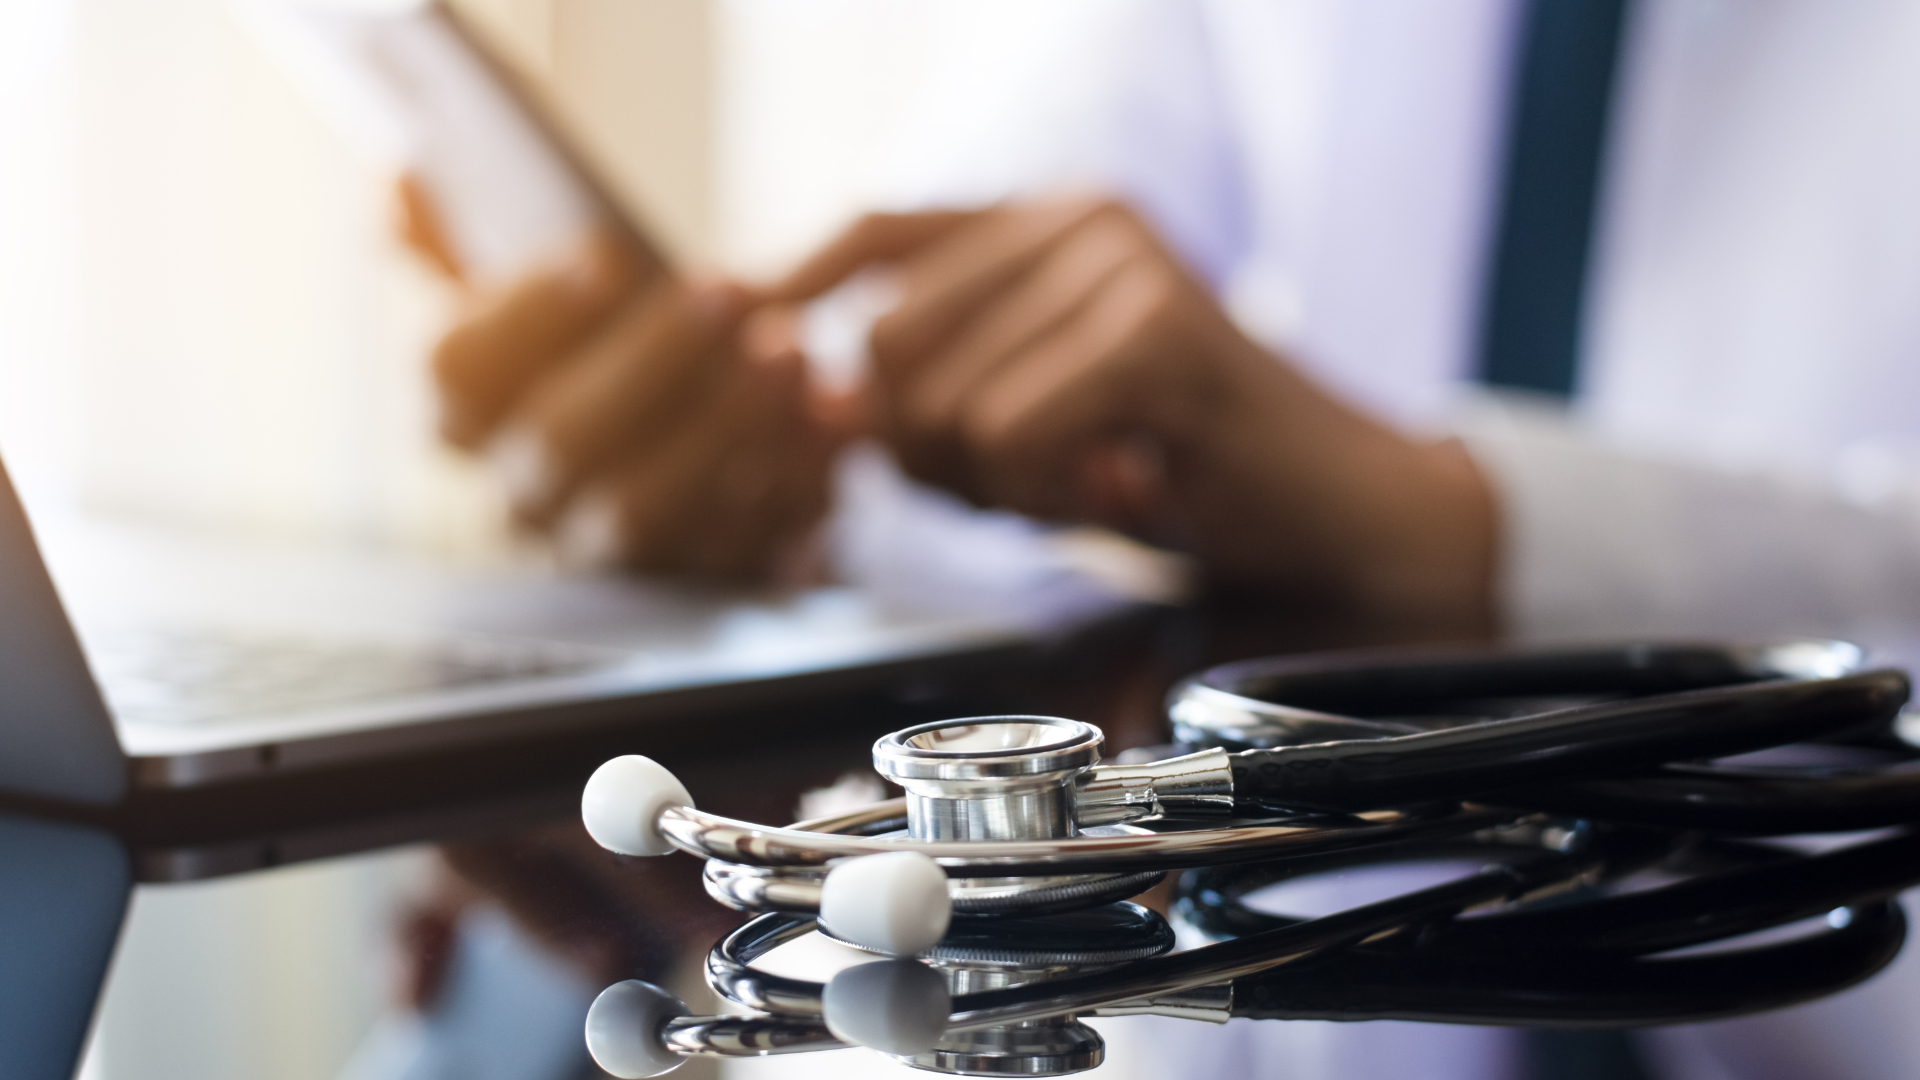 Using EMR and EHR Software to Prevent Medication Errors